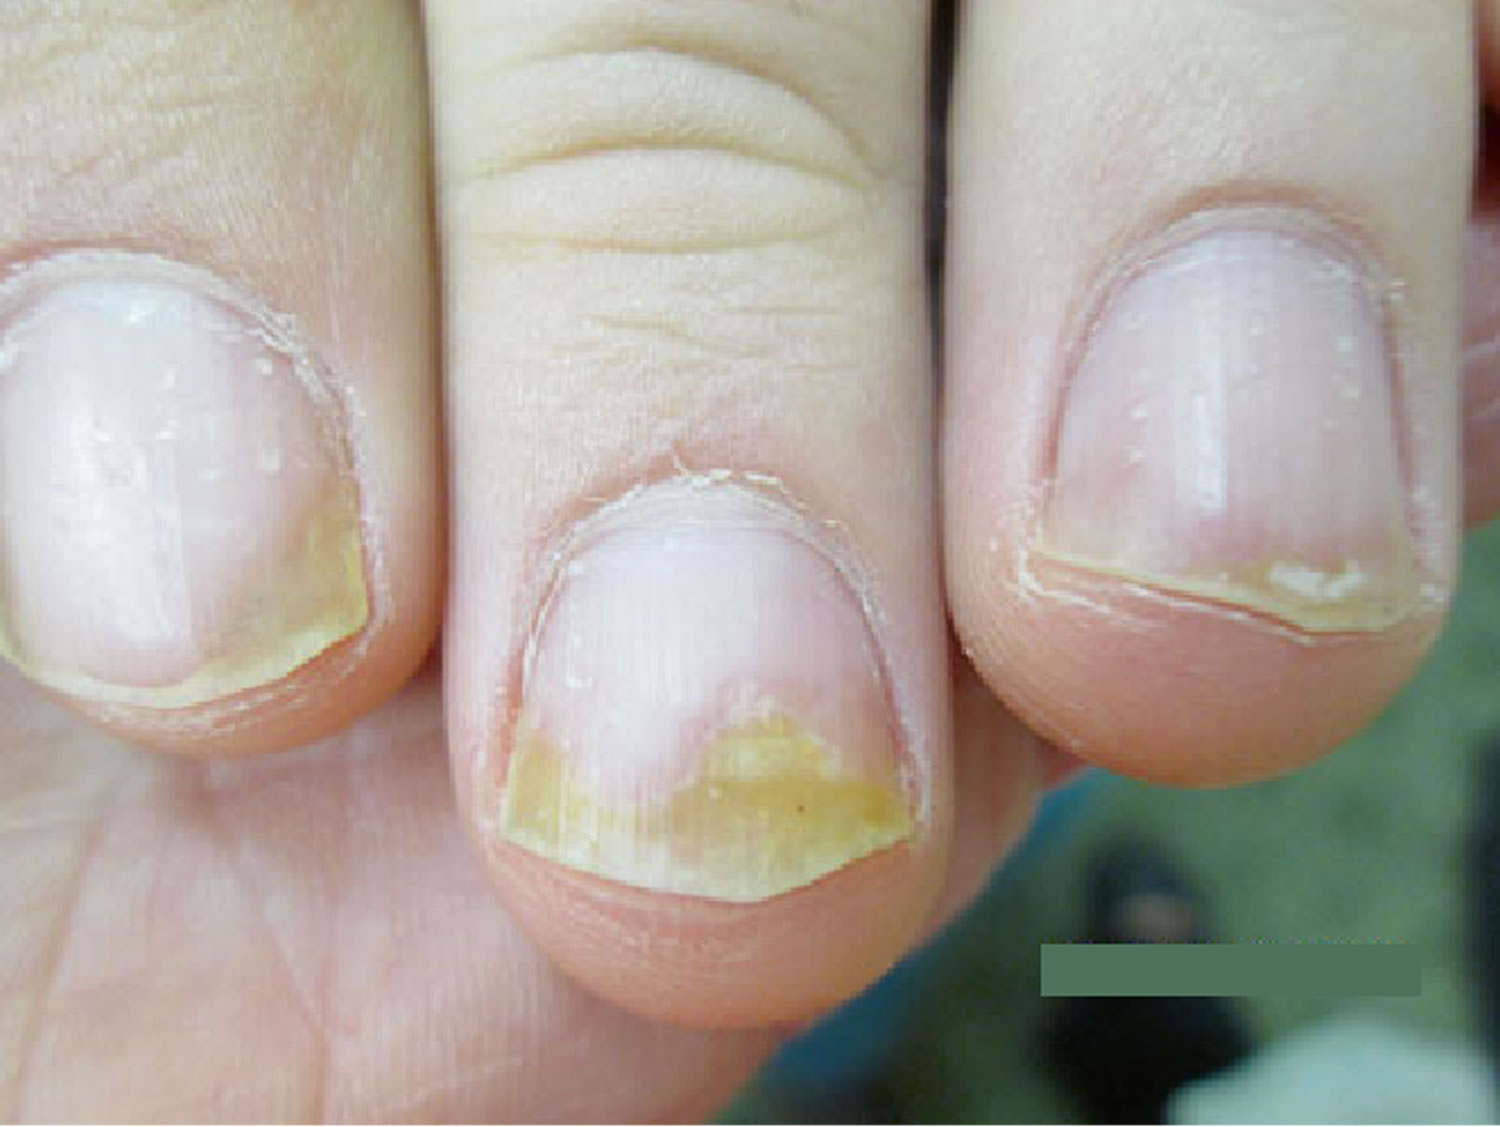 how to hide nail psoriasis)